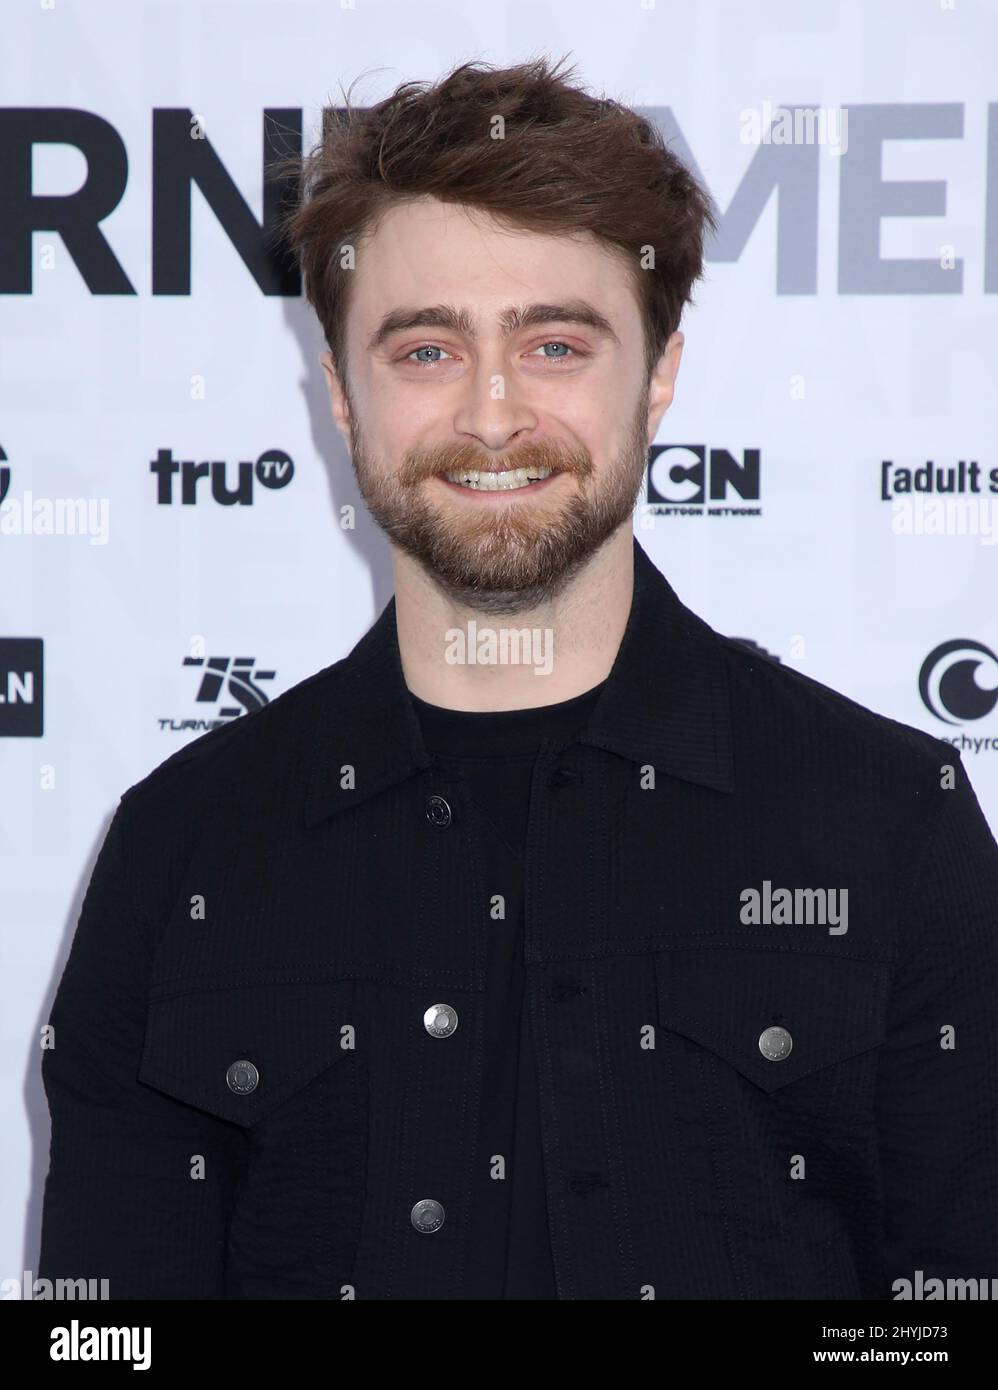 Daniel Radcliffe attending the WarnerMedia Upfront 2019 held at The Theater at Madison Square Garden Stock Photo